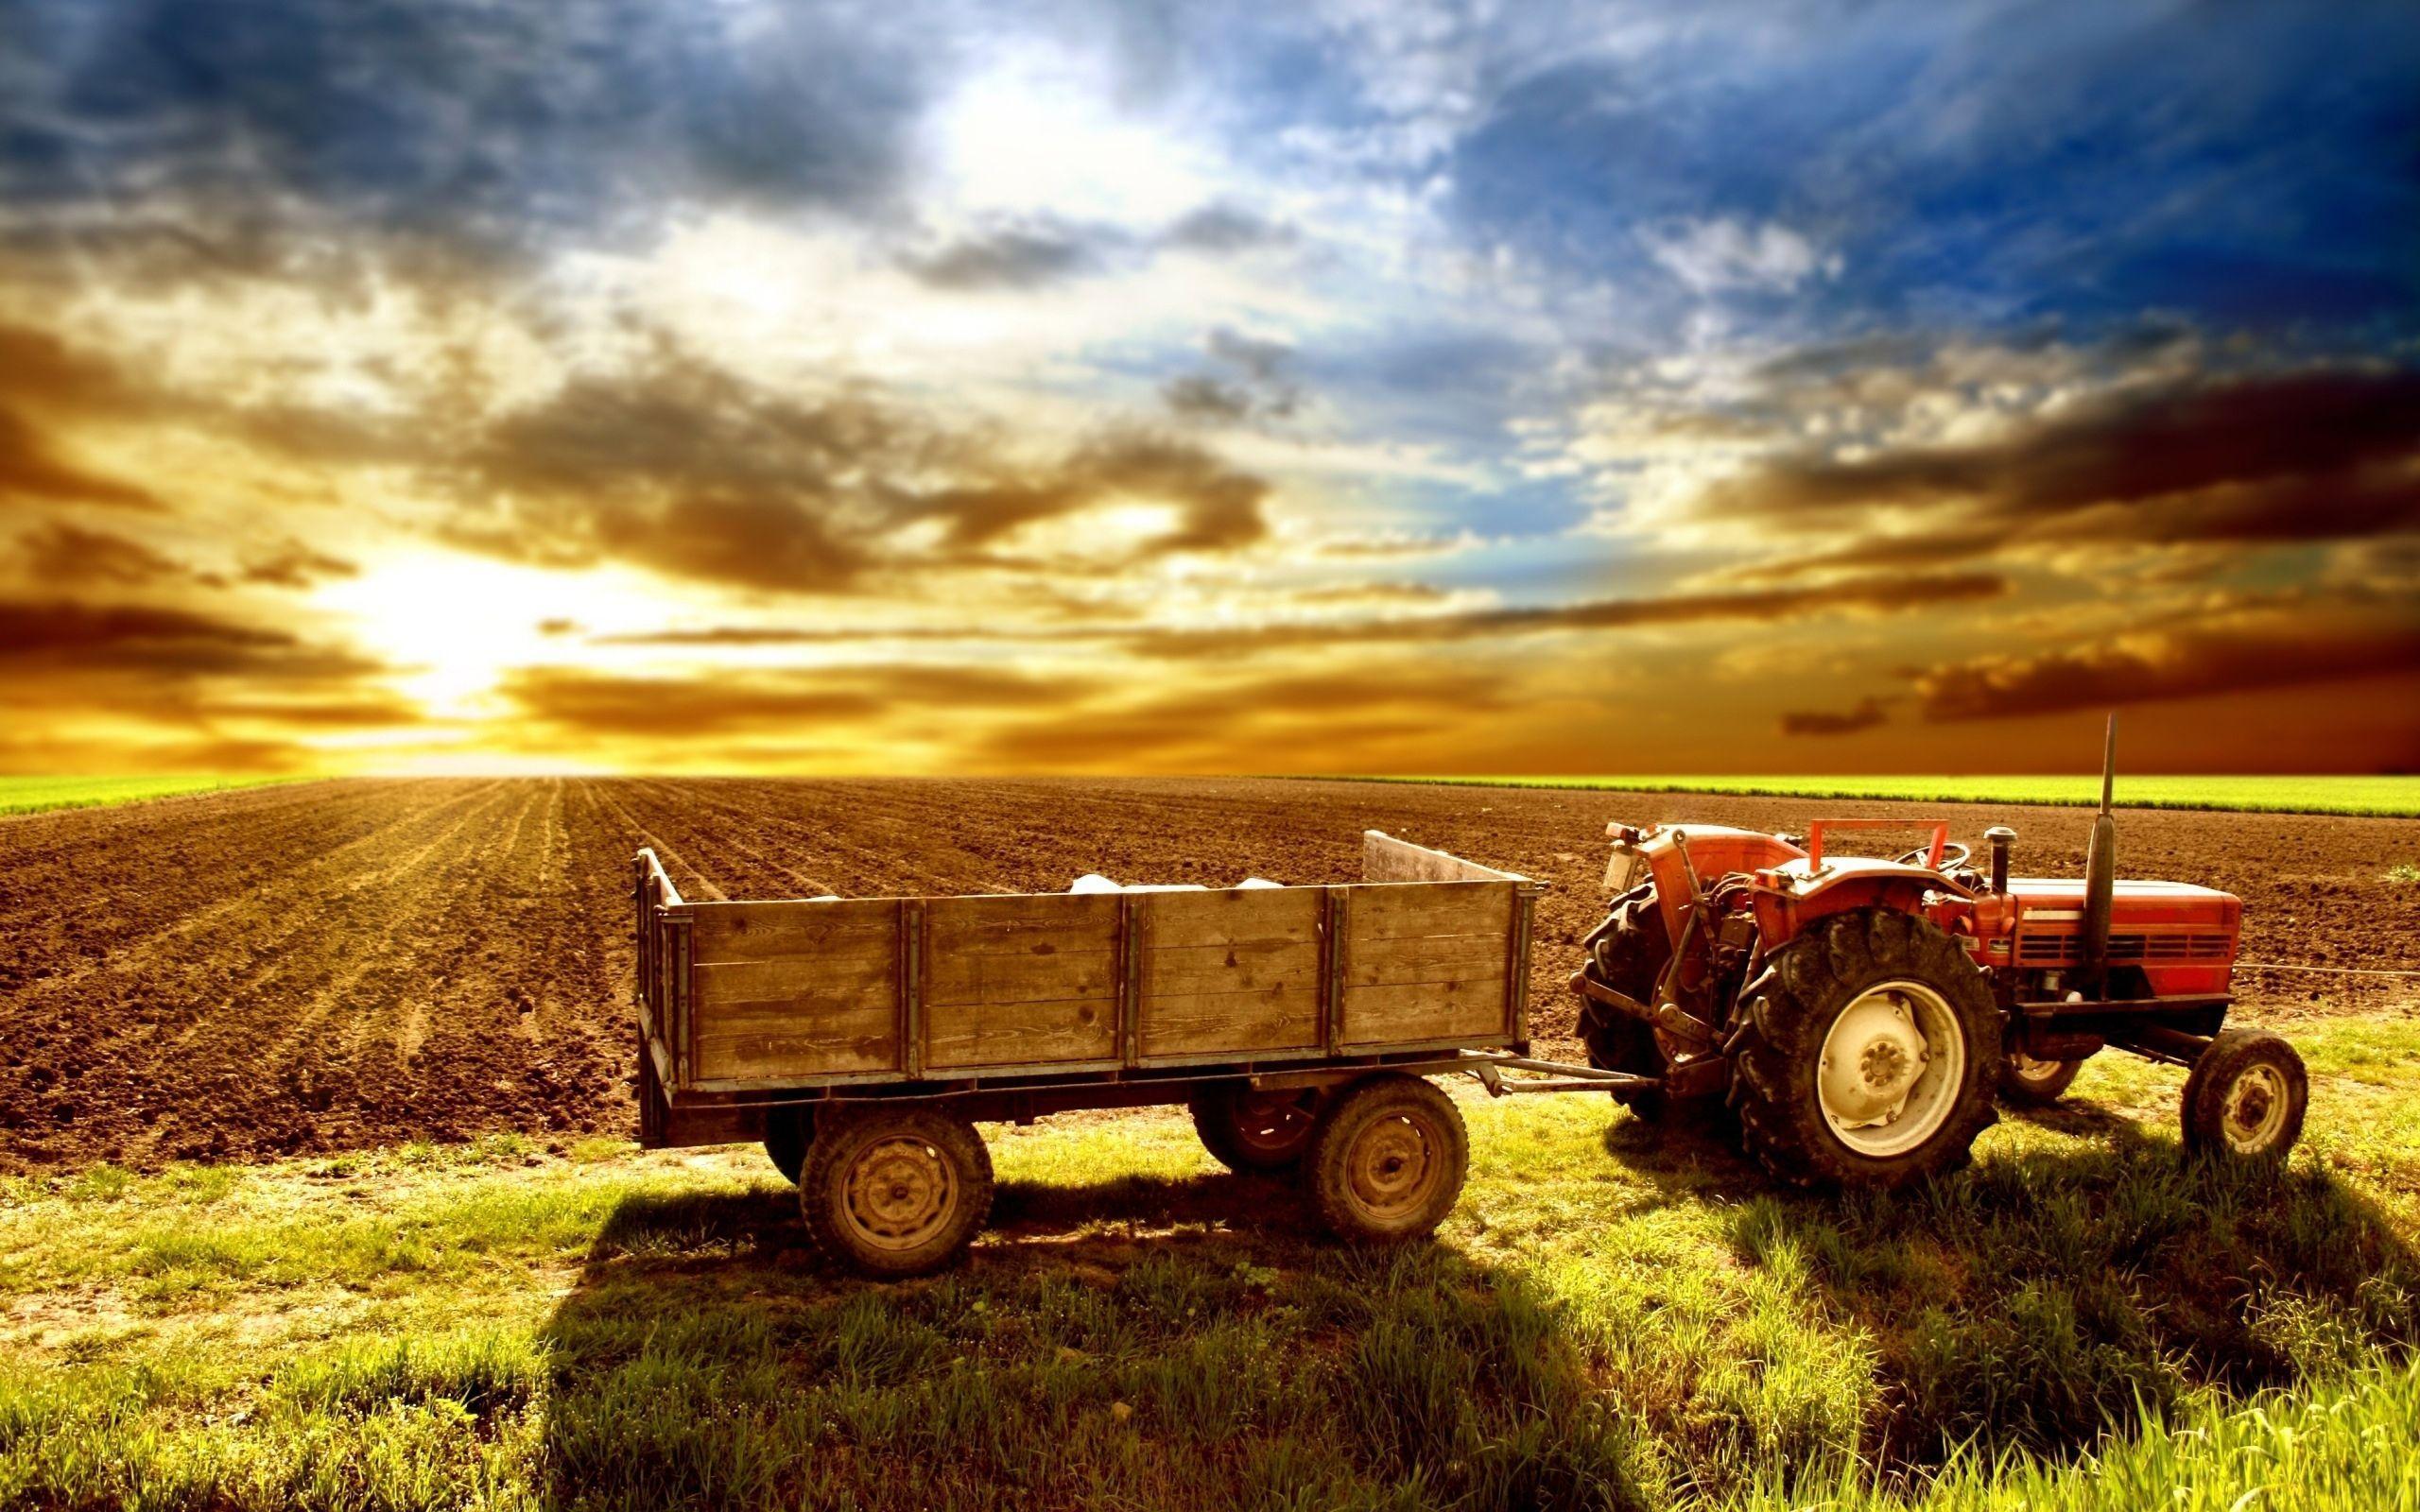 Tractor in a field at sunset - Farm